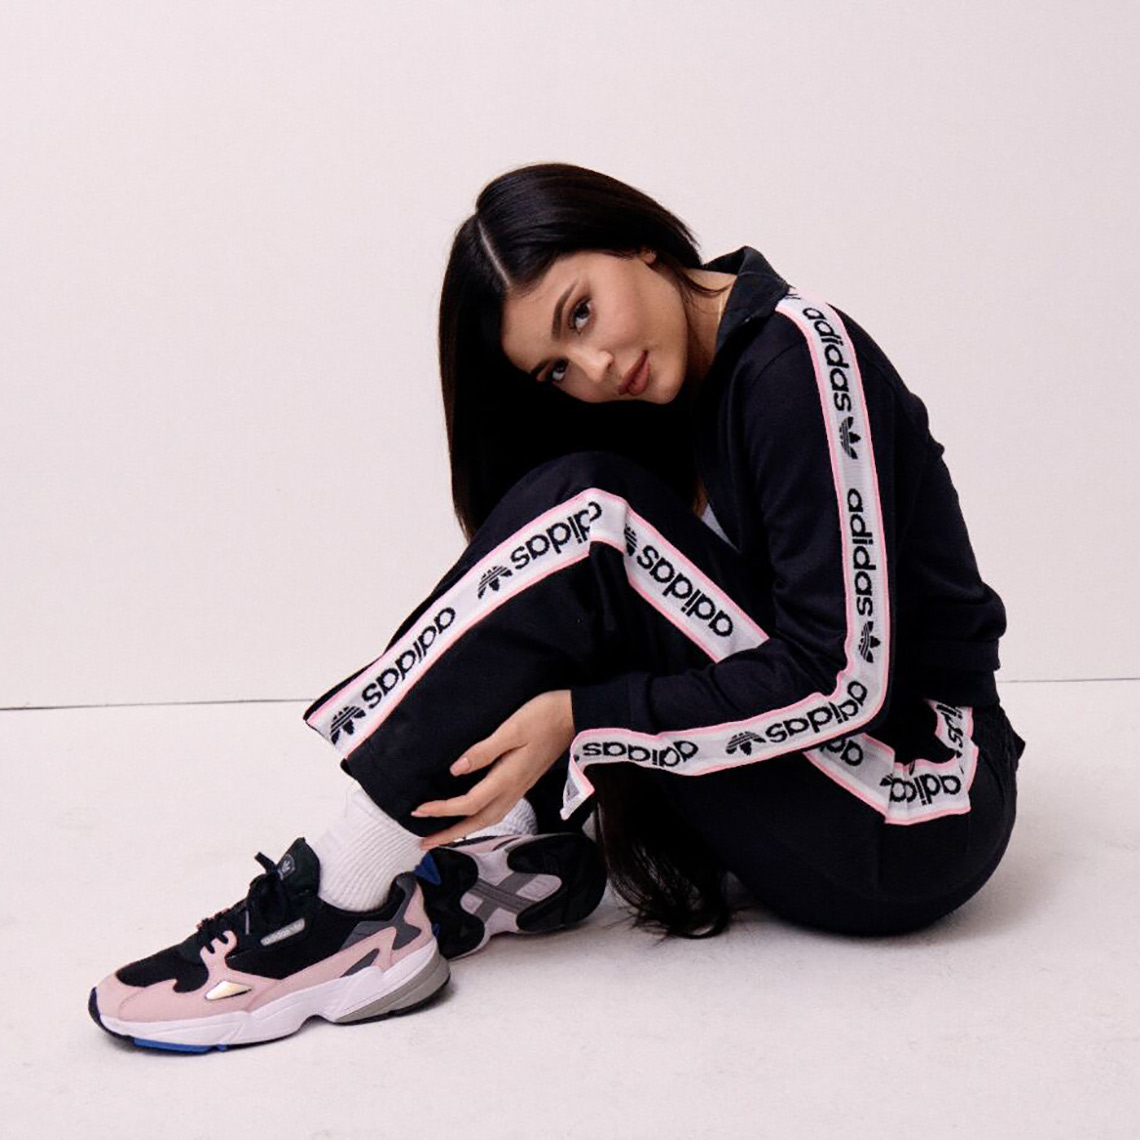 adidas kylie jenner shoes